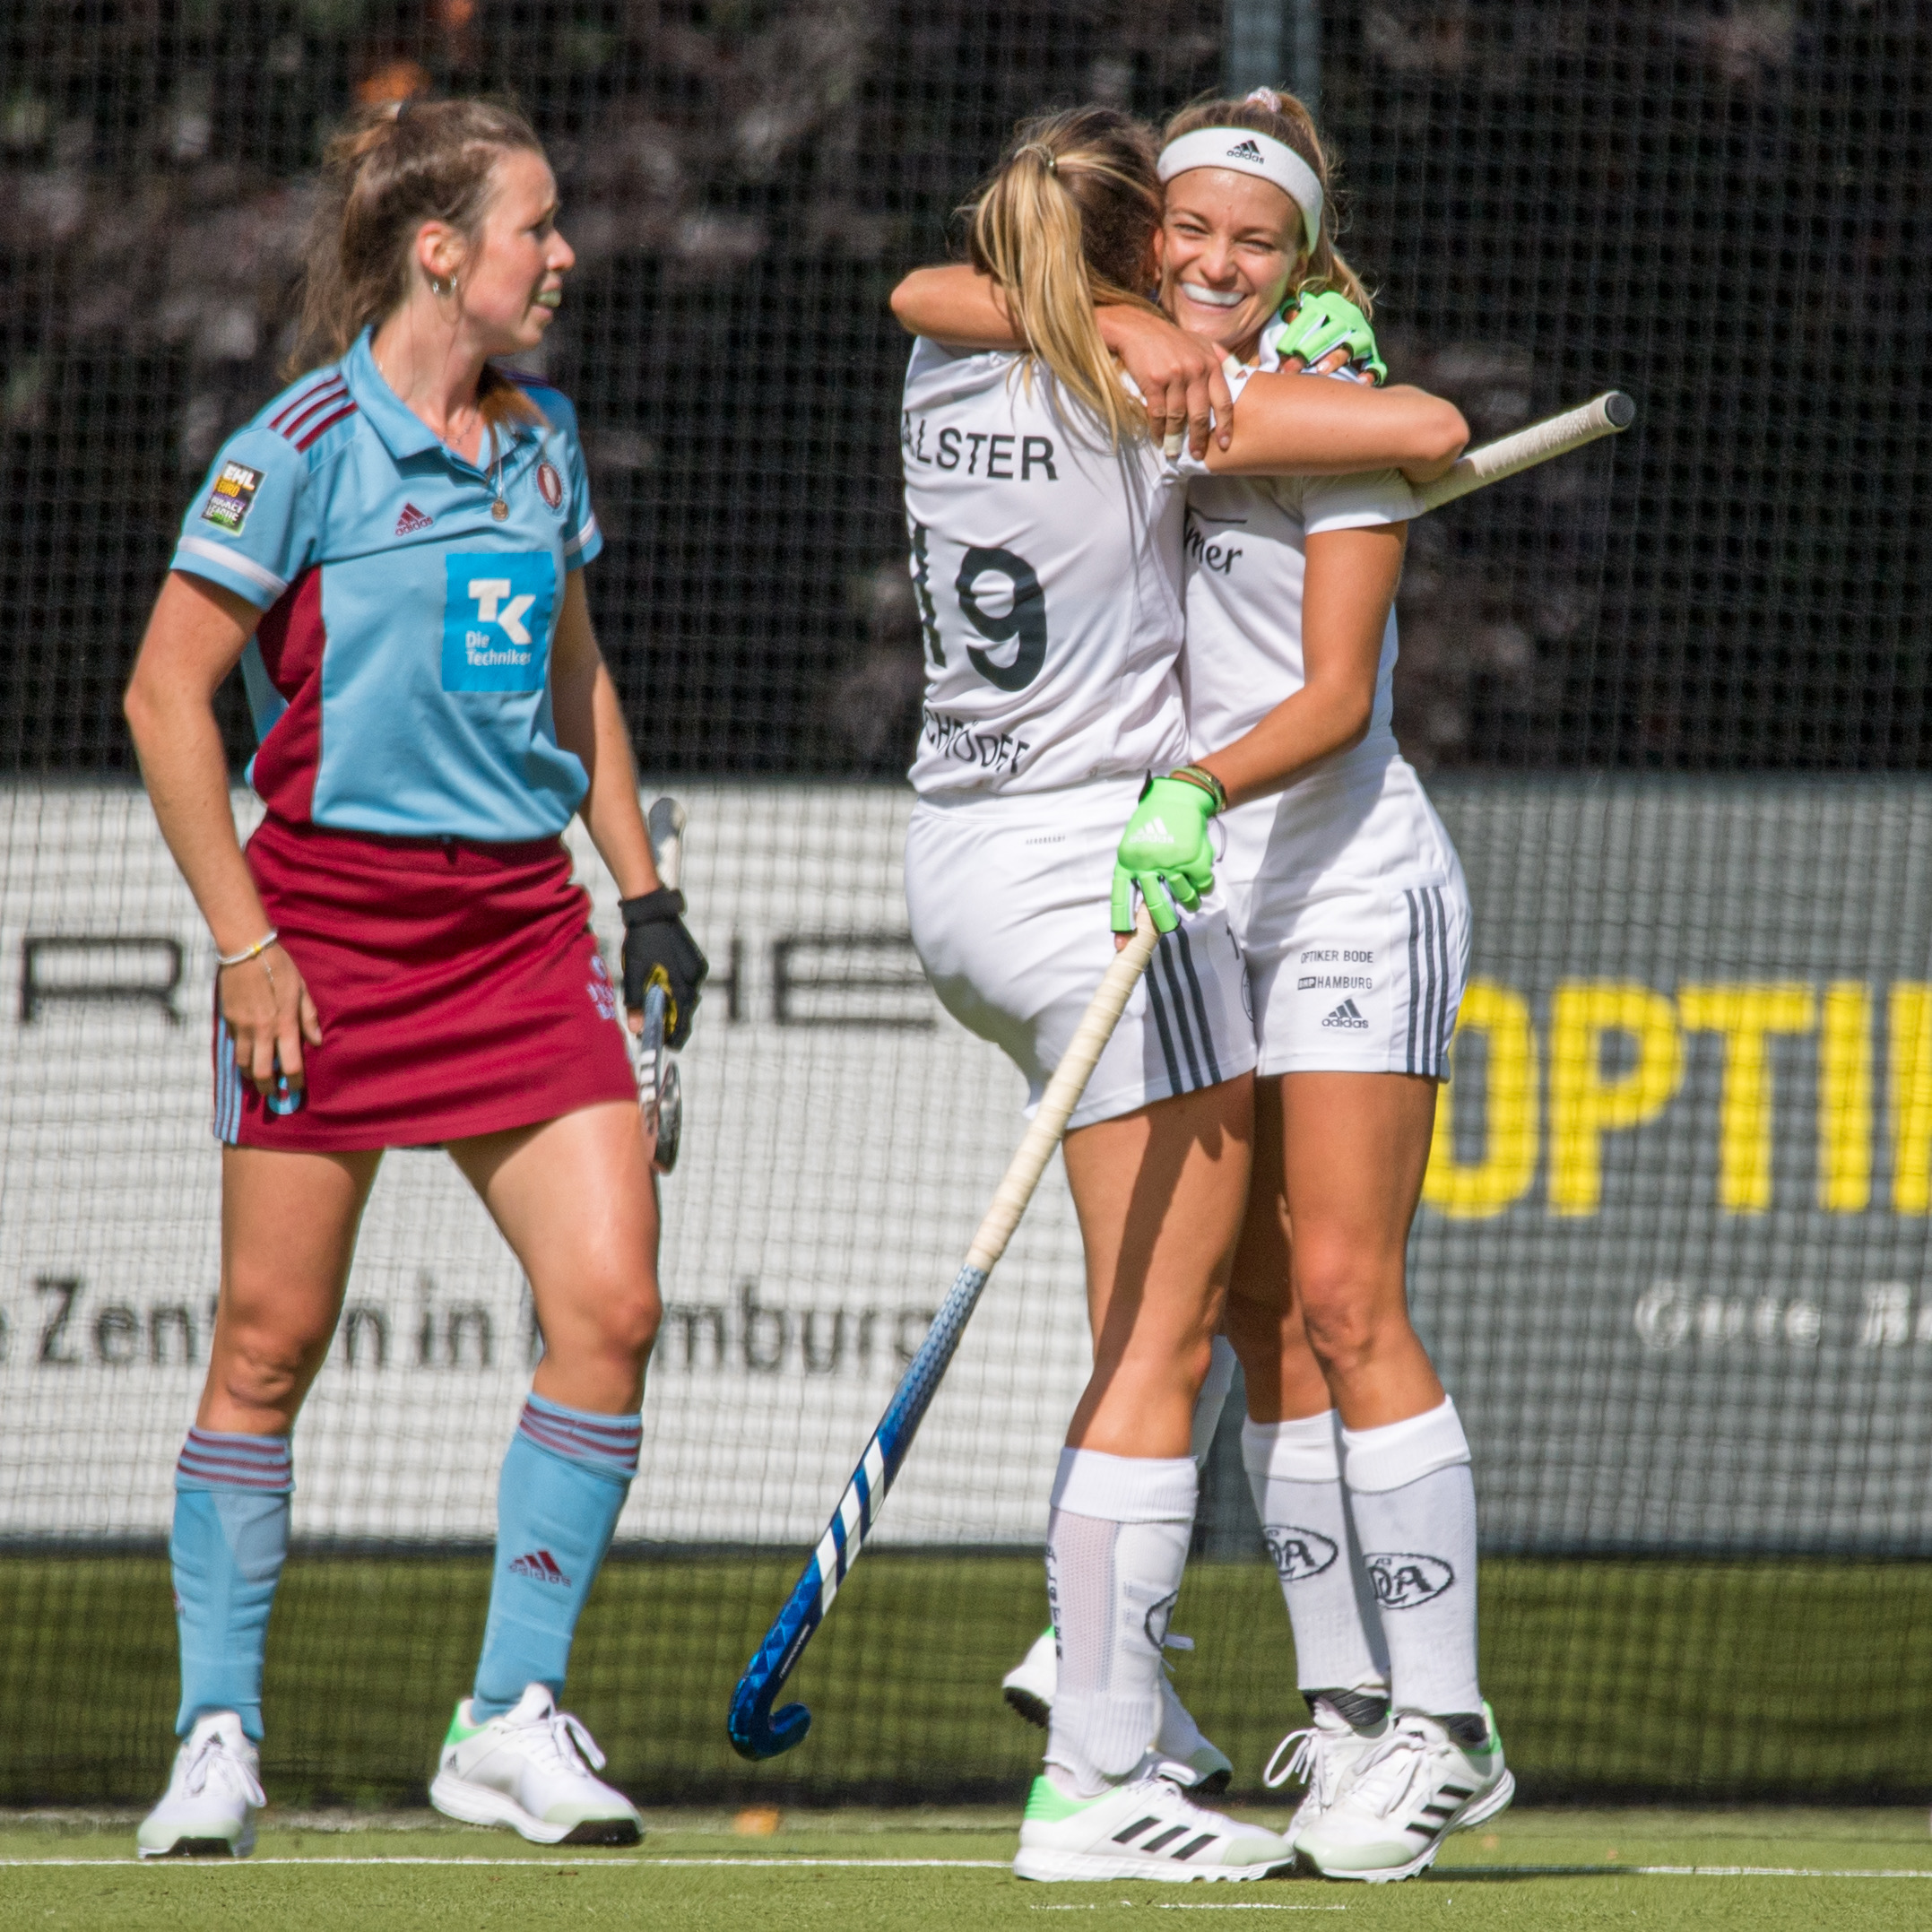 A1EE5ECF 0F07 4CAB B5E1 BC9D316861F7 - Germany: Bundesliga preview - The third game weekend - September 16, 2022